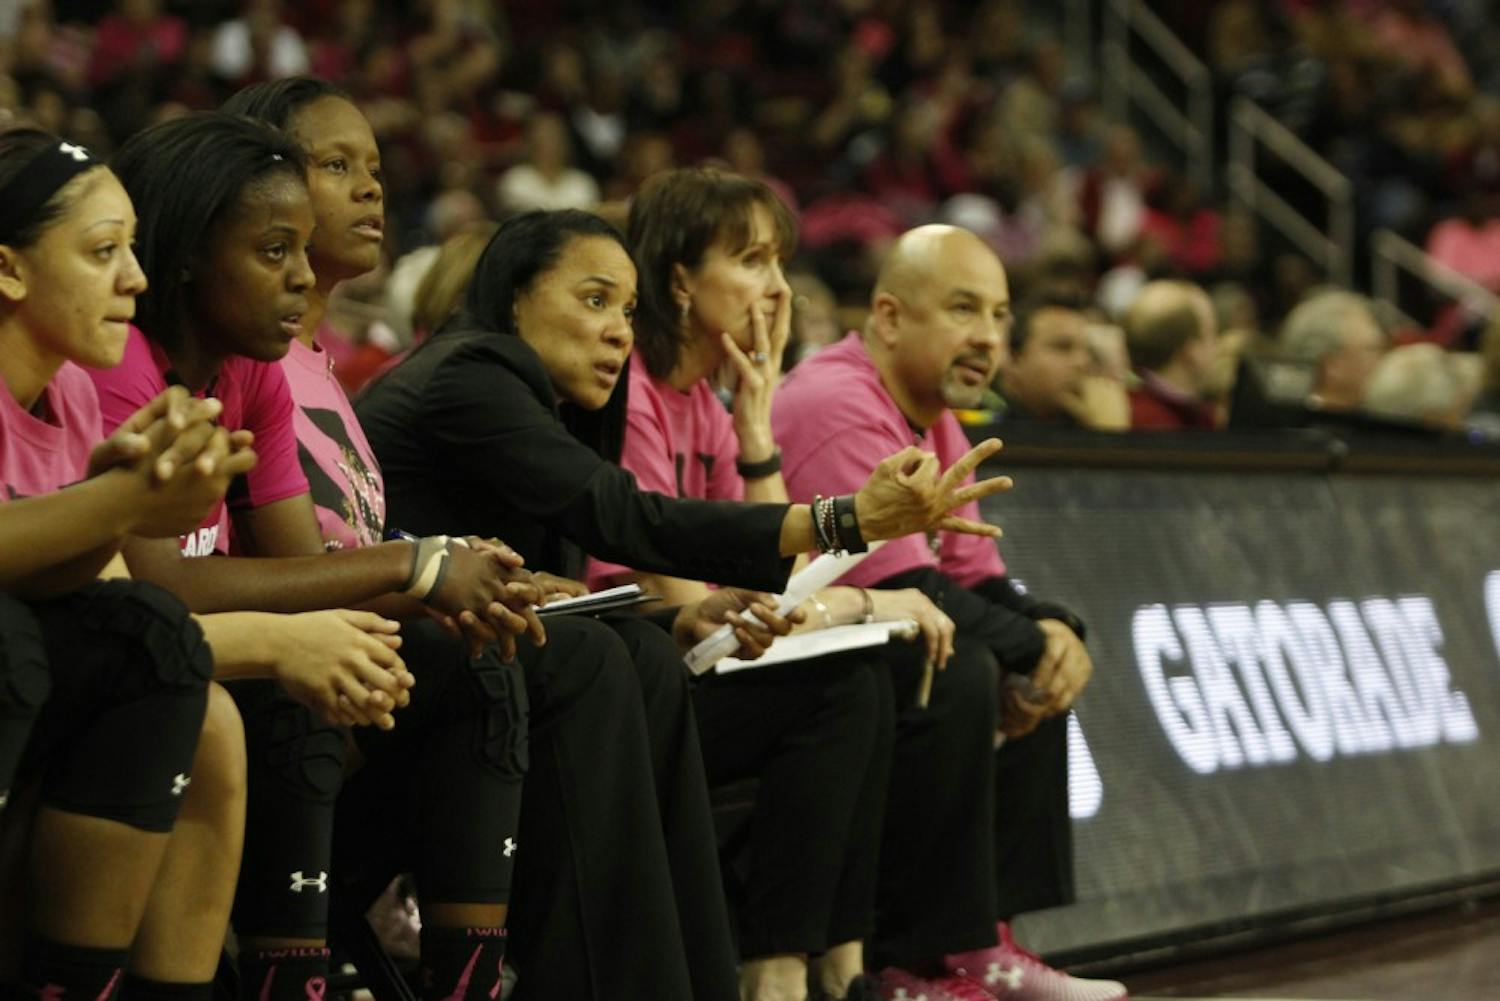 A concerned Dawn Staley gives the team a three-minute notice in the final minutes of the grueling two-hour match against the Georgia Bulldogs, for the sake of maintaining their ten-point lead. South Carolina Gamecocks vs Georgia Bulldogs. Colonial Life Arena, Columbia, SC. February 18, 2016